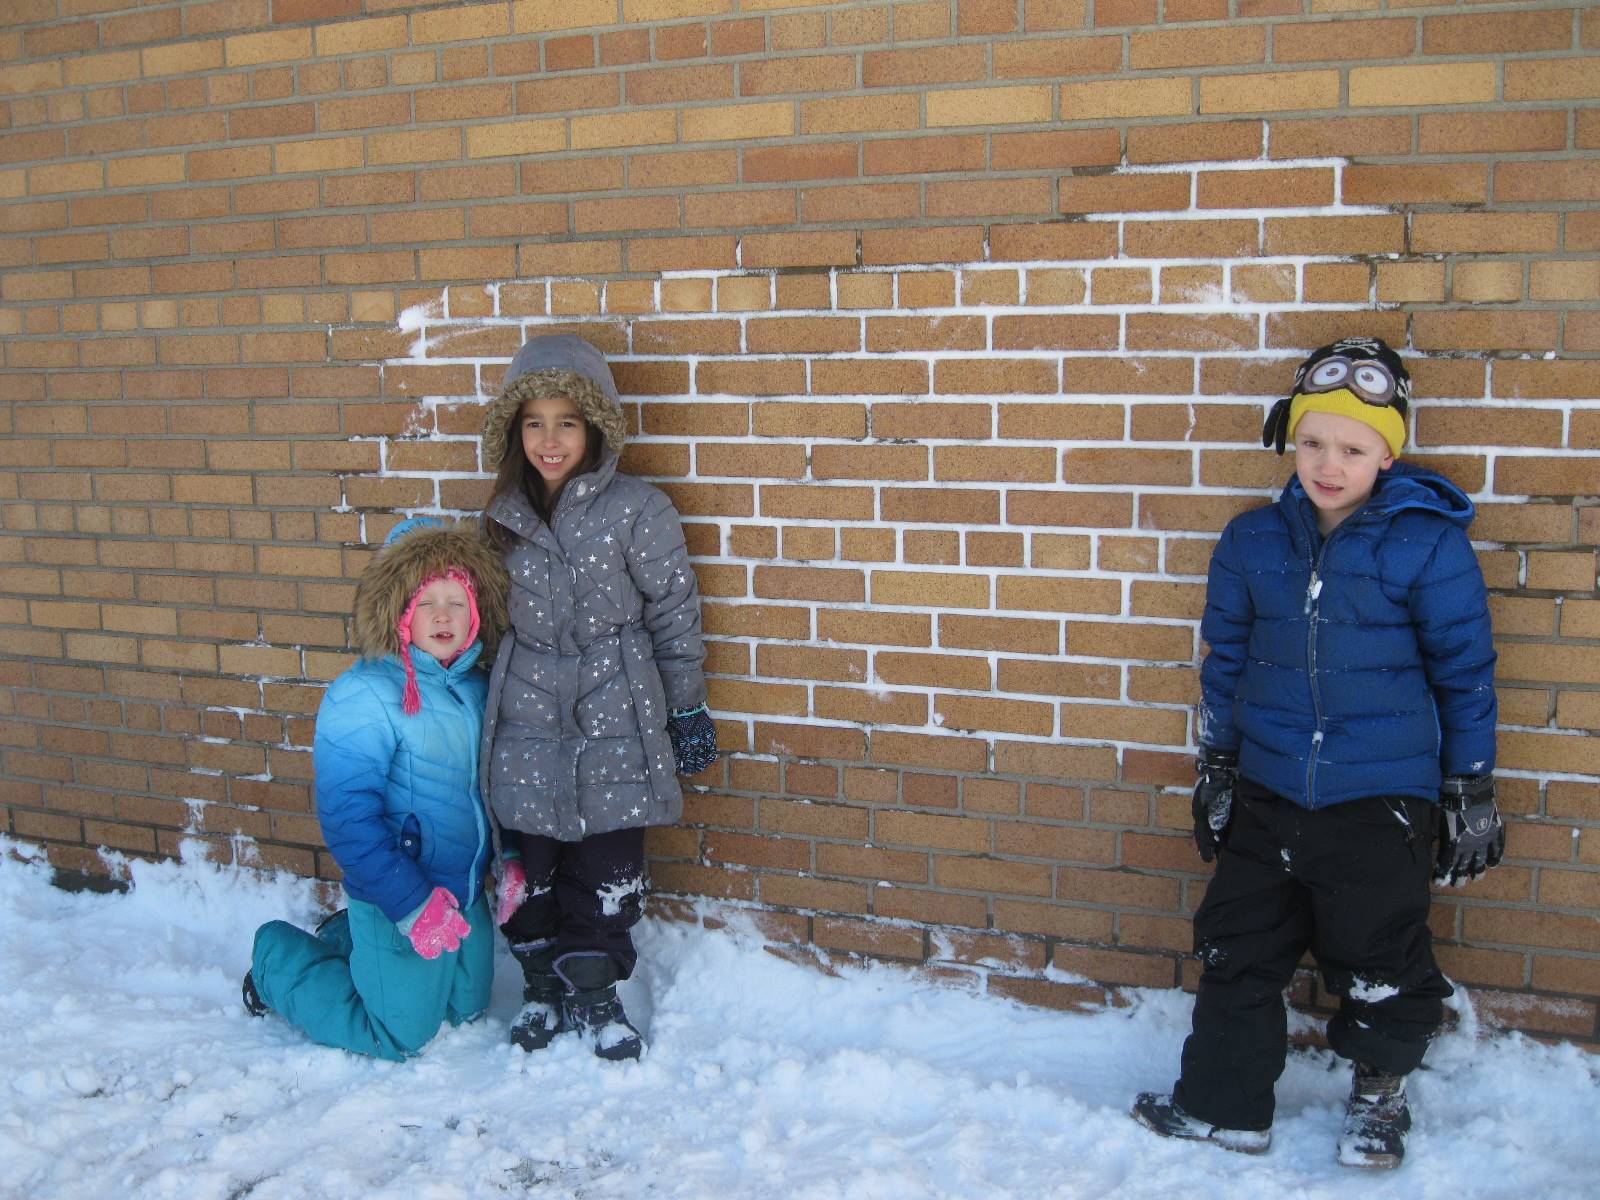 Children use snow as "chalk" to decorate building.